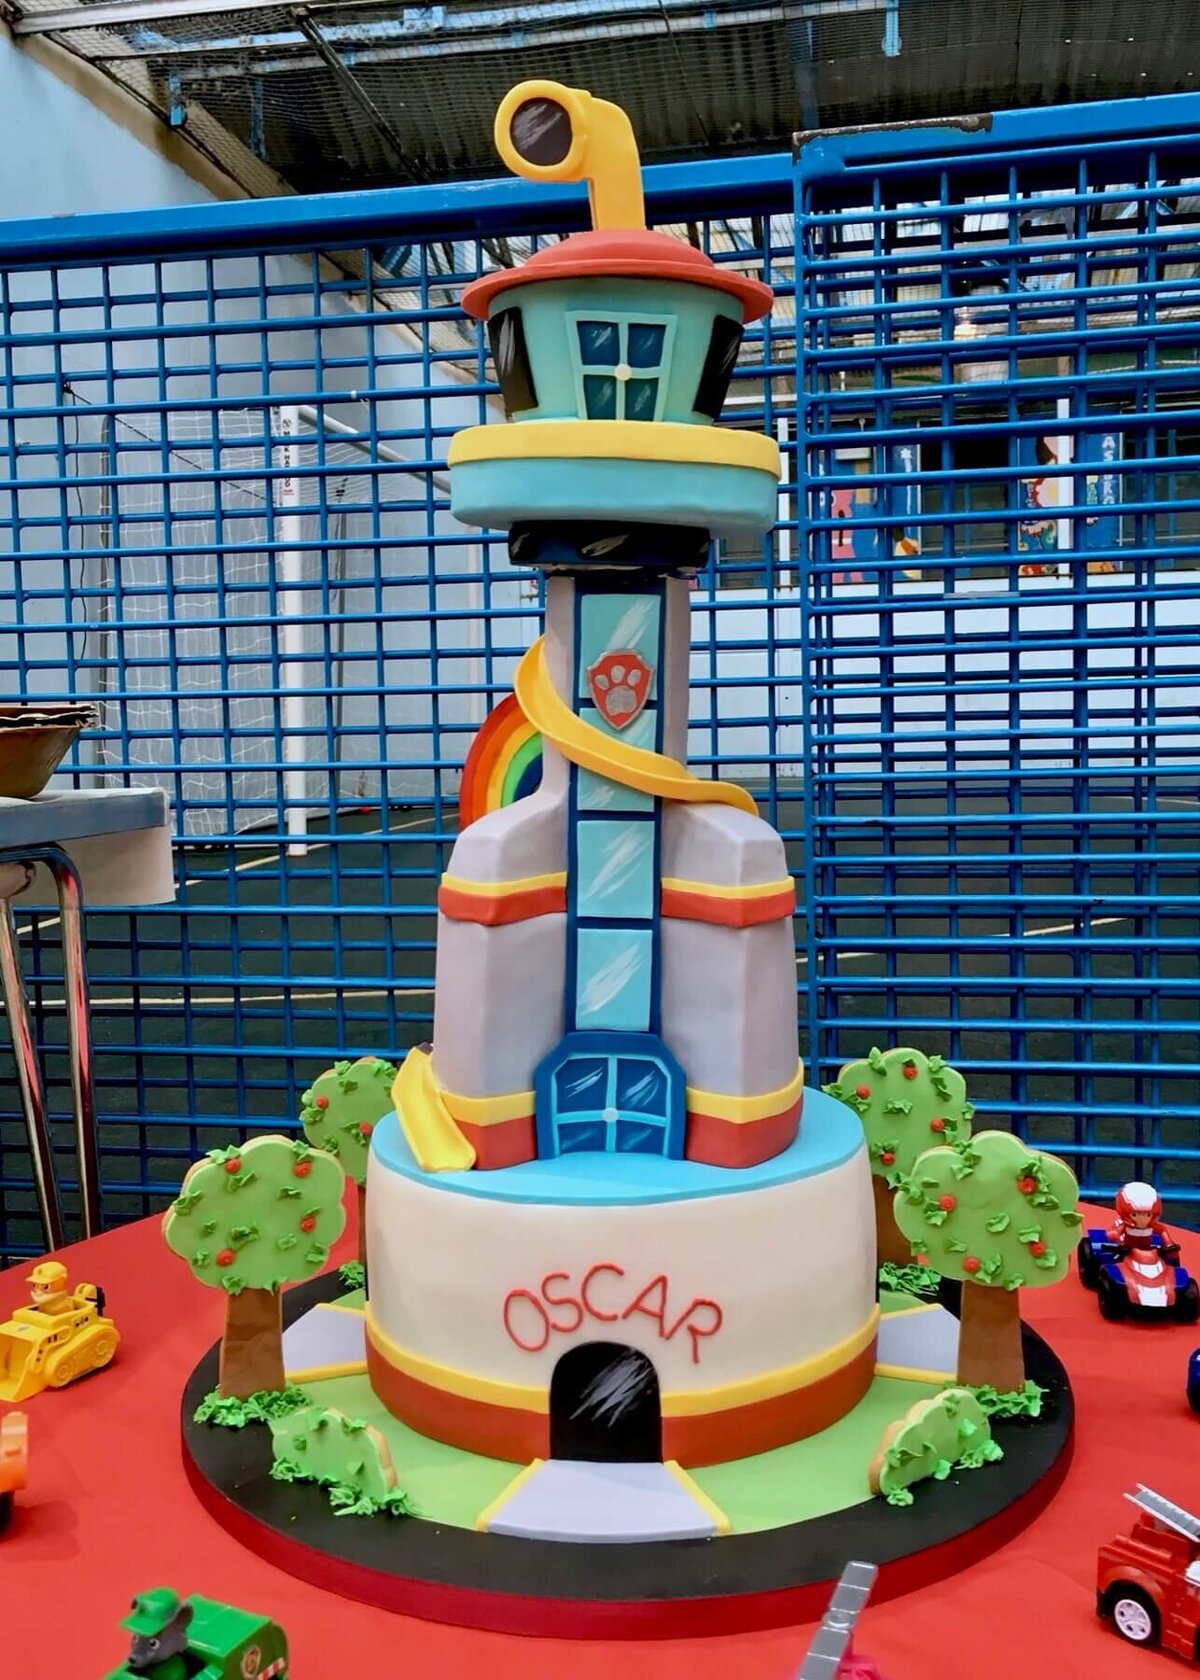 An elaborate very tall cake of a tall building with a slide running around the building and a periscope coming out of the top with a Paw Patrol theme